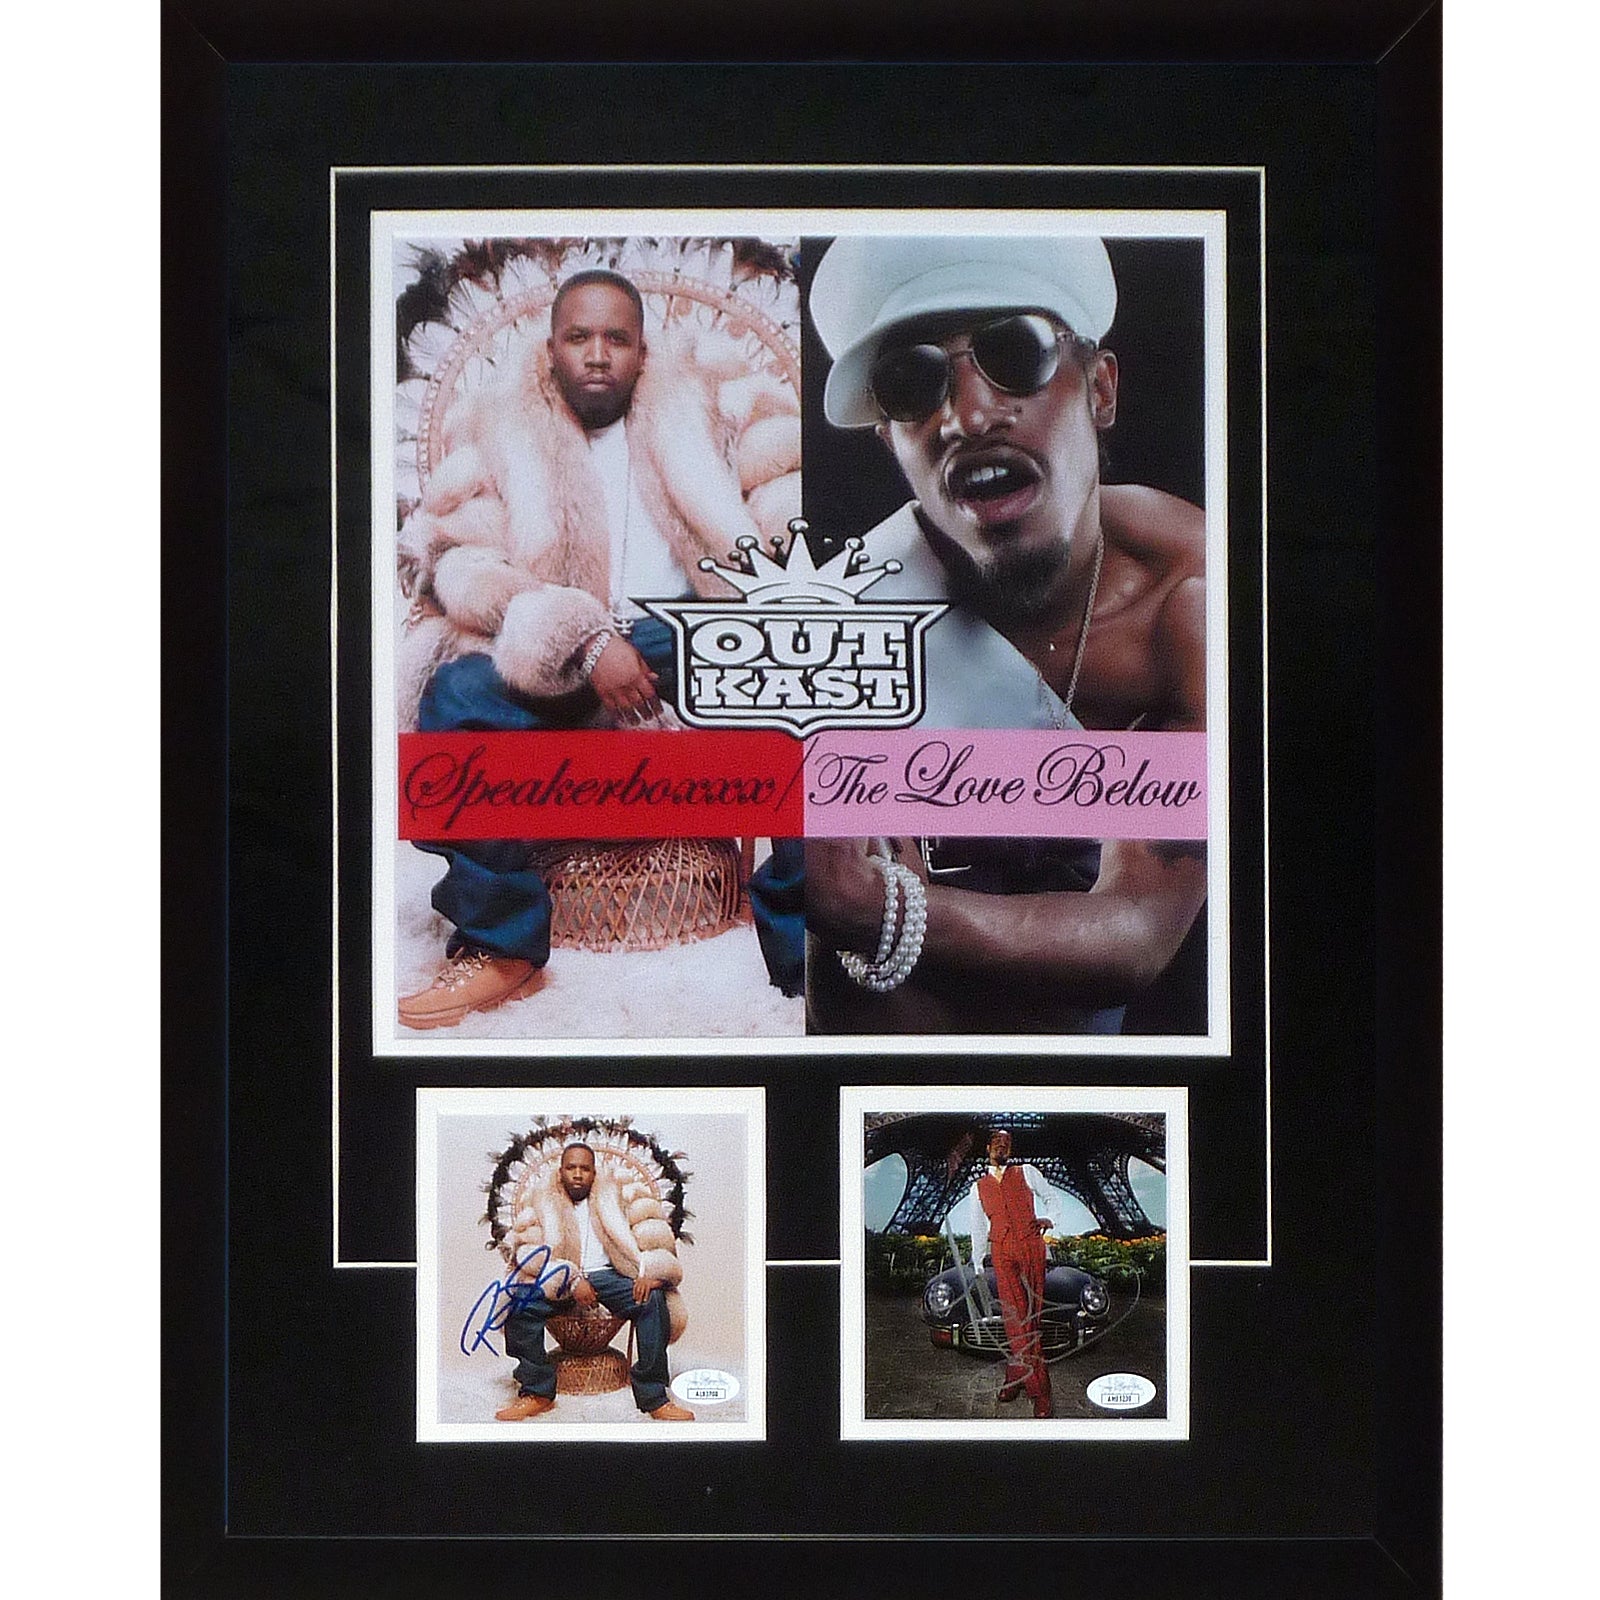 Outkast Big Boi And Andre 3000 Autographed Speakerboxxx/The Love Below Deluxe Framed CD Piece - JSA